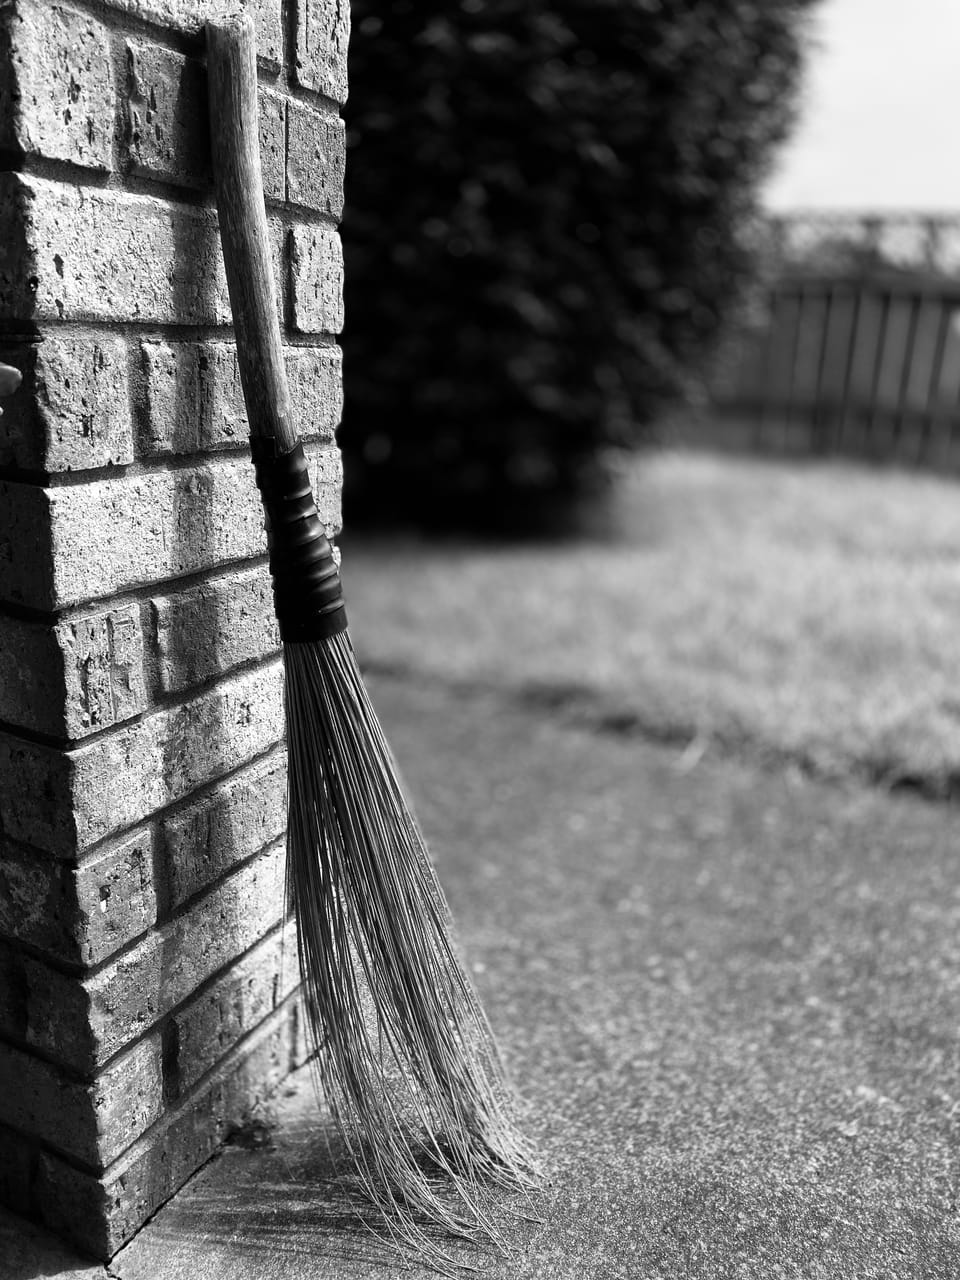 A black and white image of a reed broom bound to a wooden handle. It leans against a brick wall outdoors.